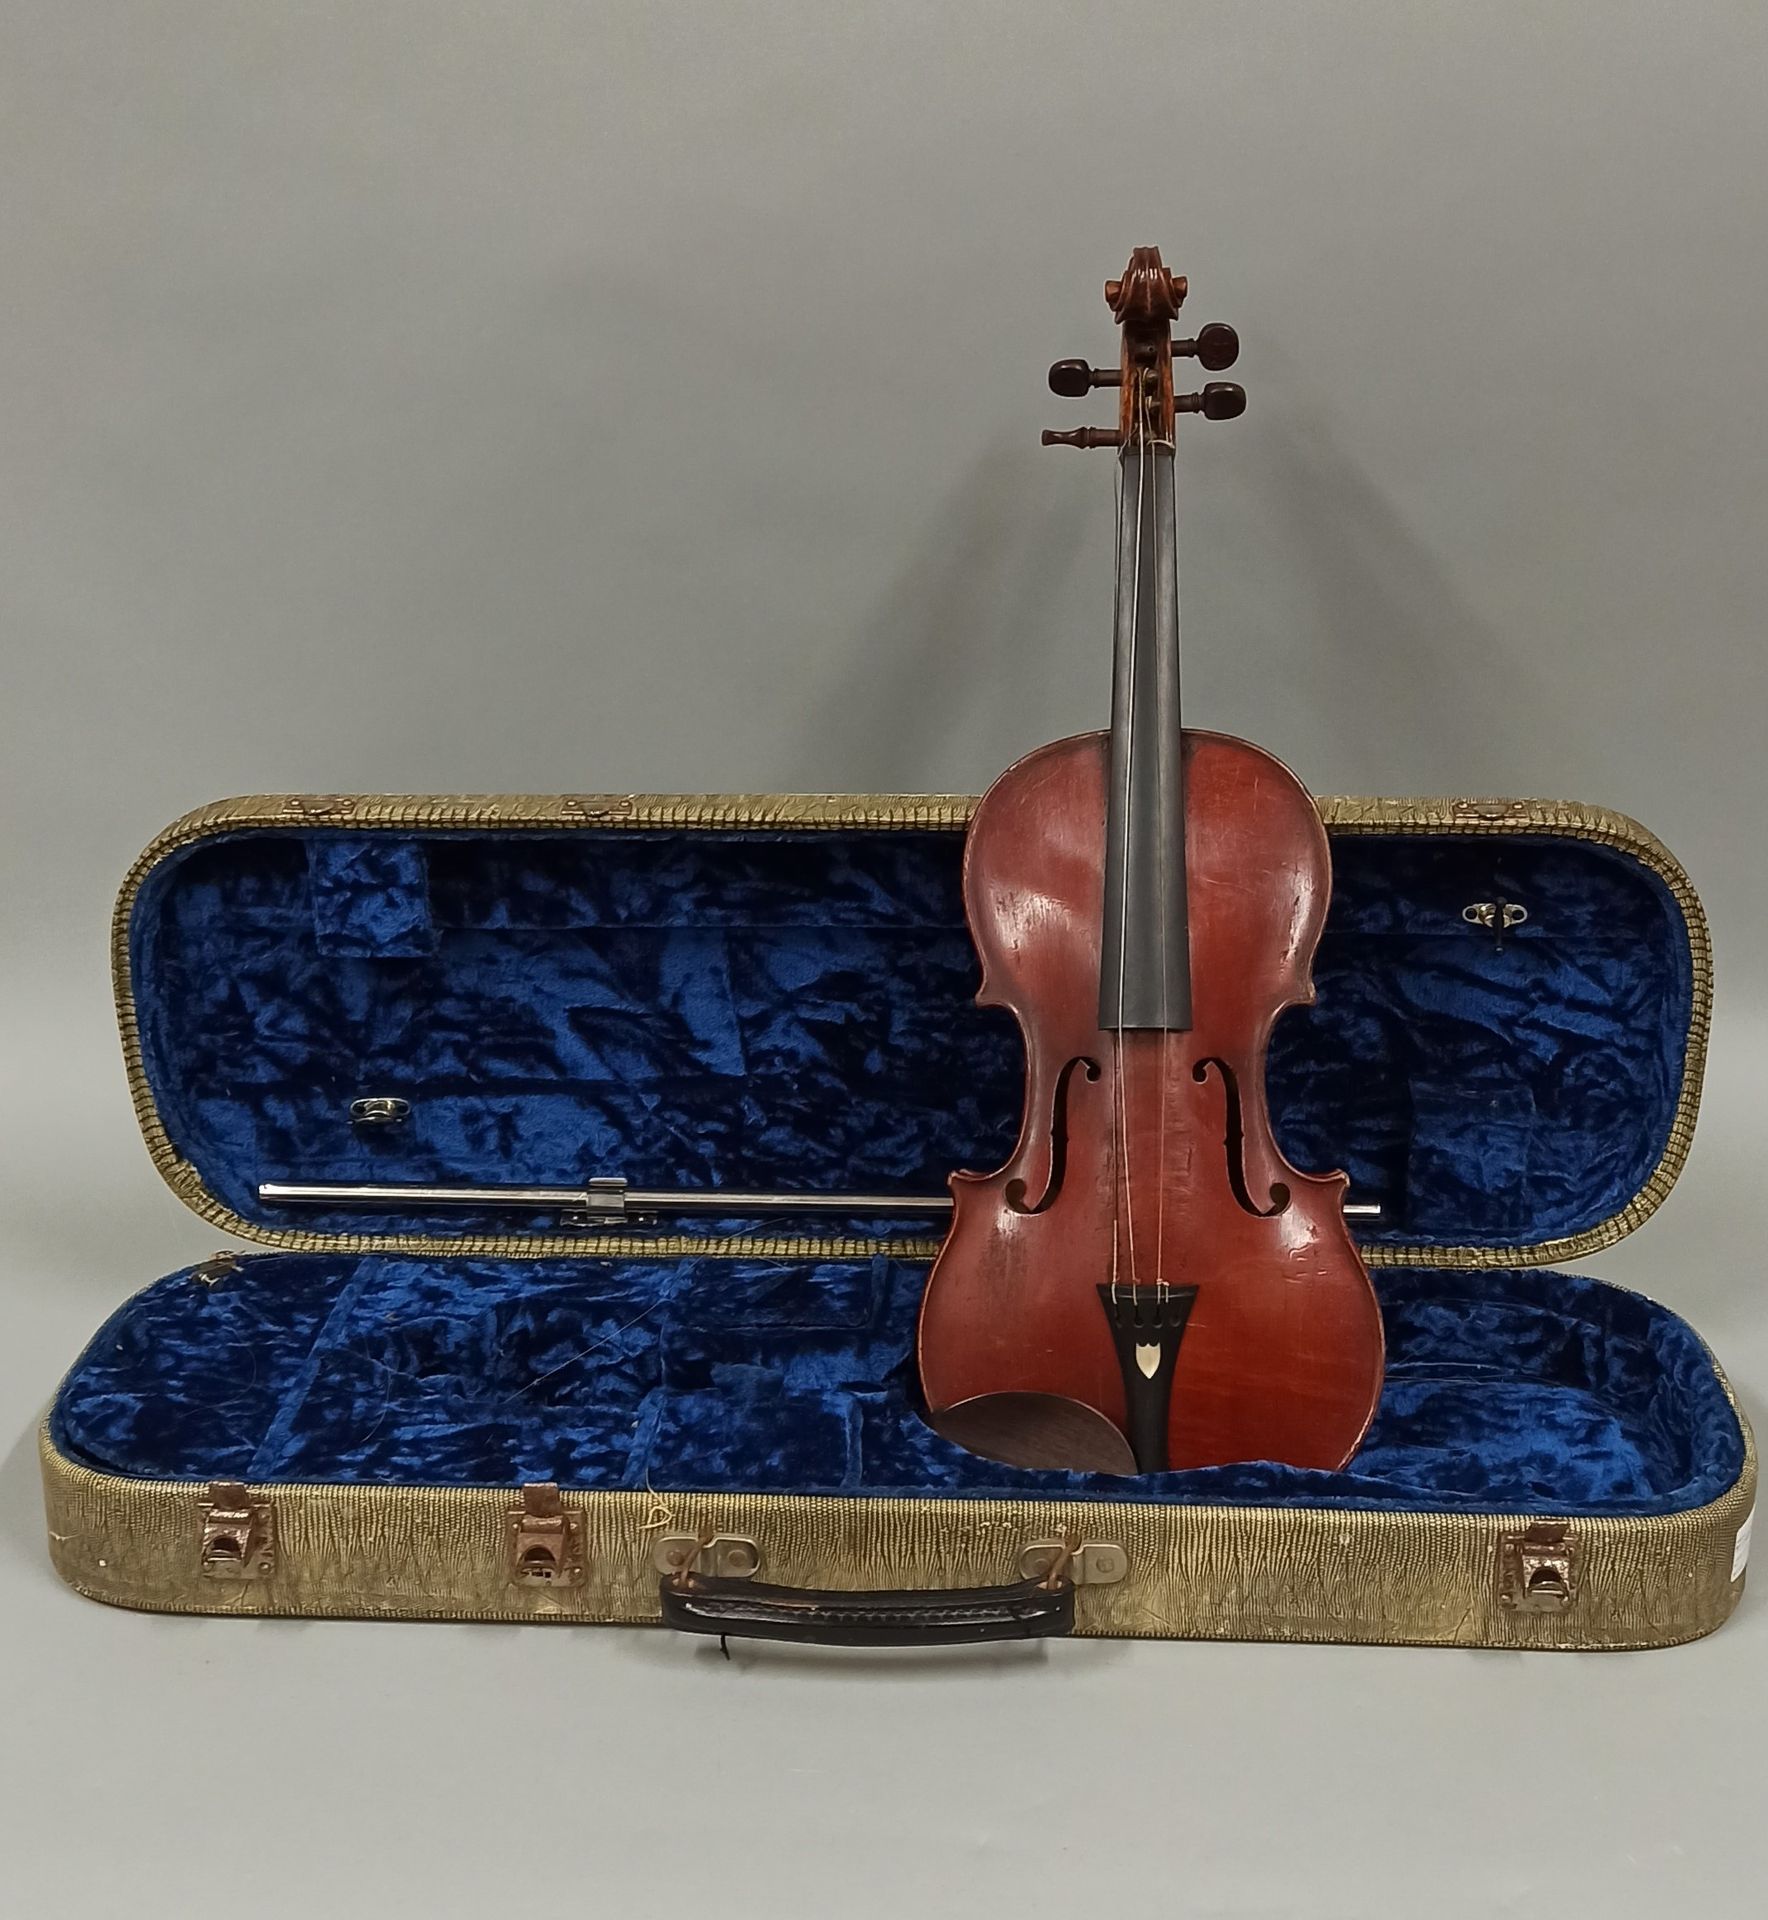 Null Violin by Jacques BARBE, made in the early 19th century

Iron mark "J. BARB&hellip;